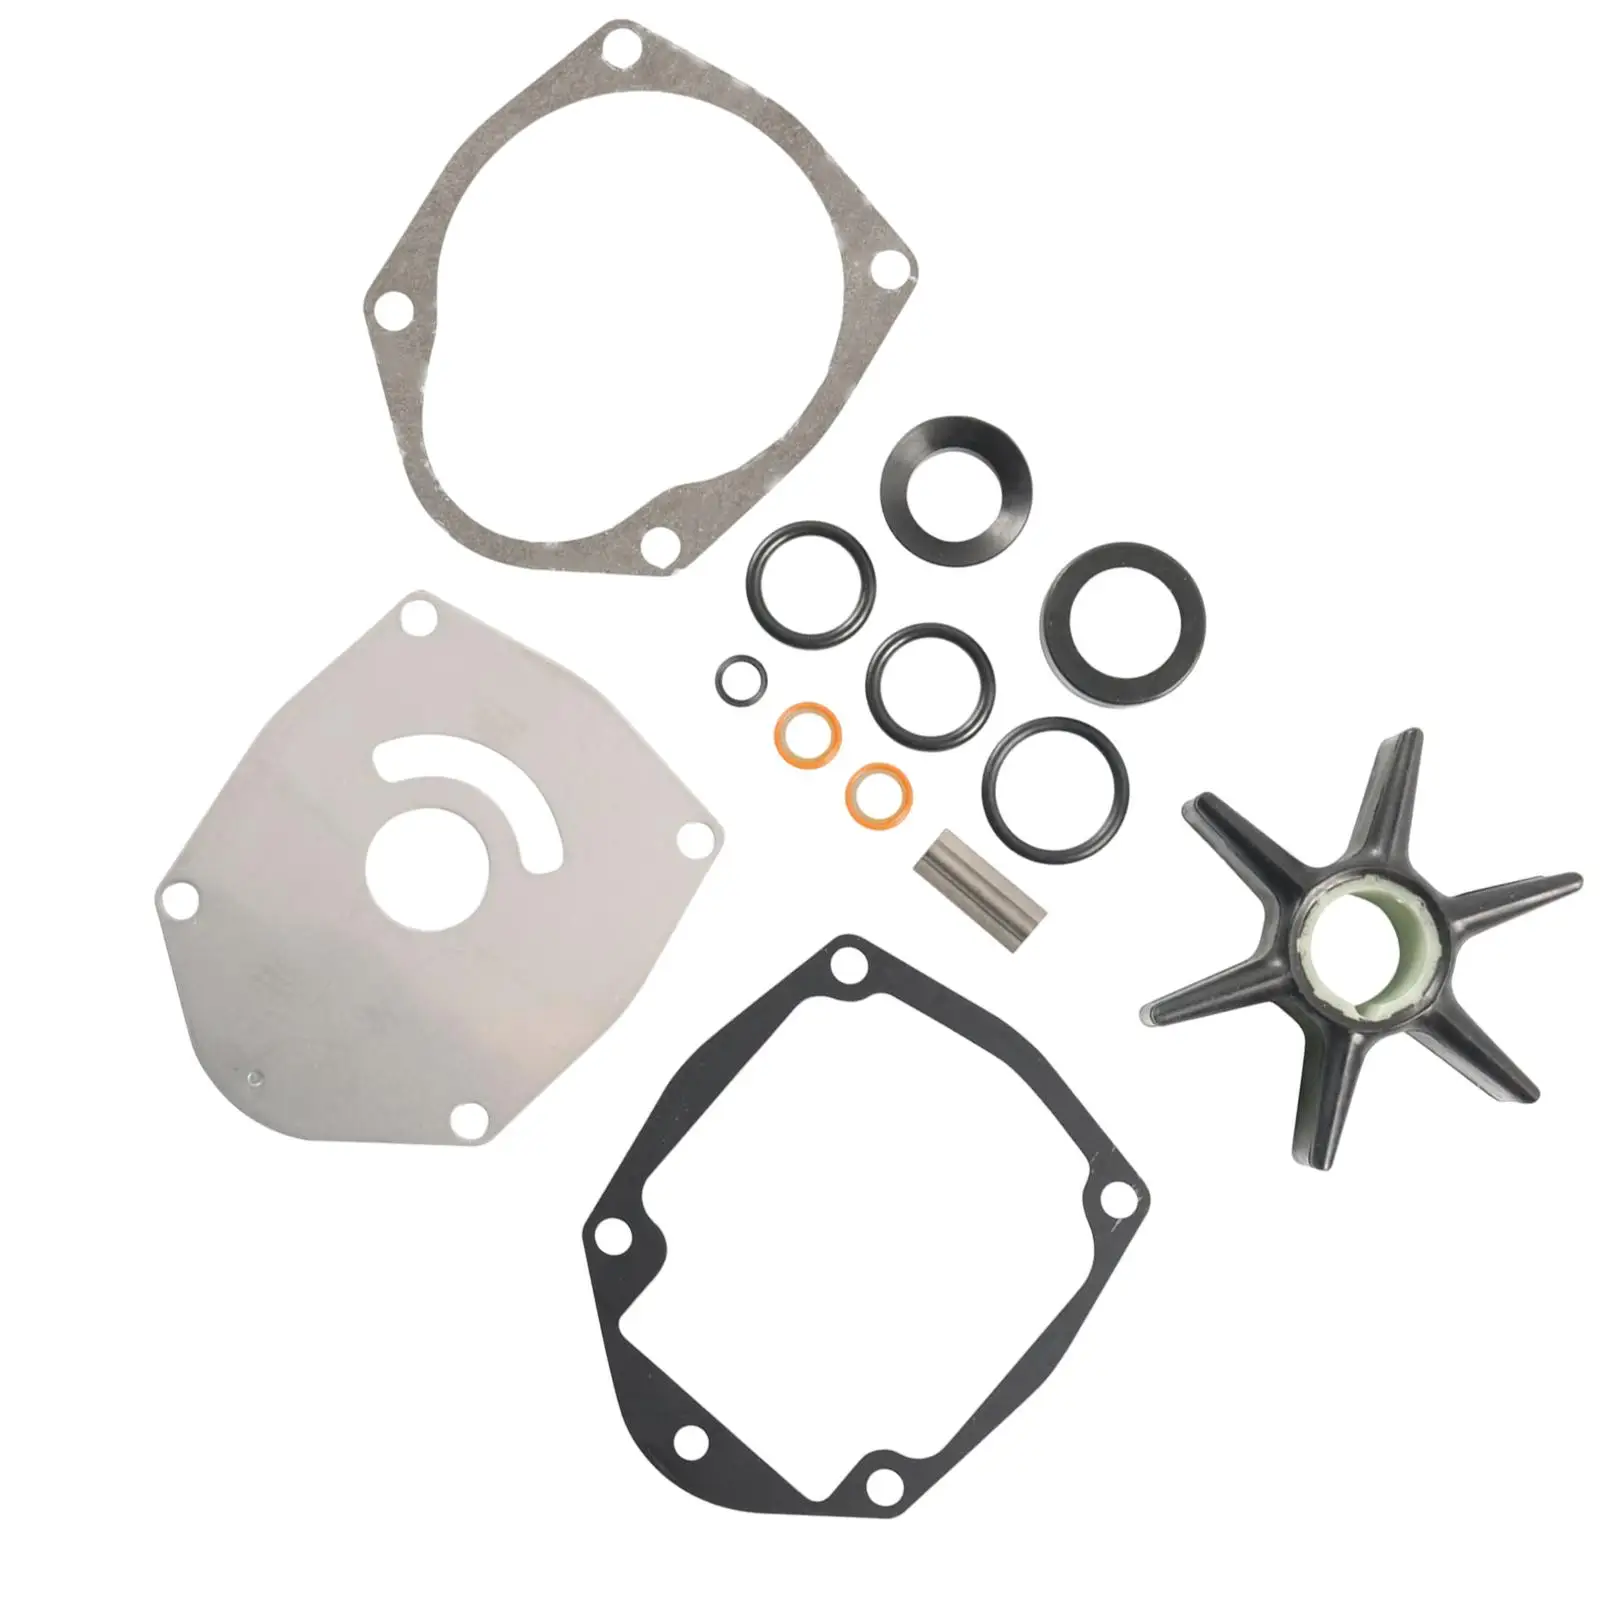 15Pcs Water Pump Impeller Kit 8M0100526 Fit for  Replacement